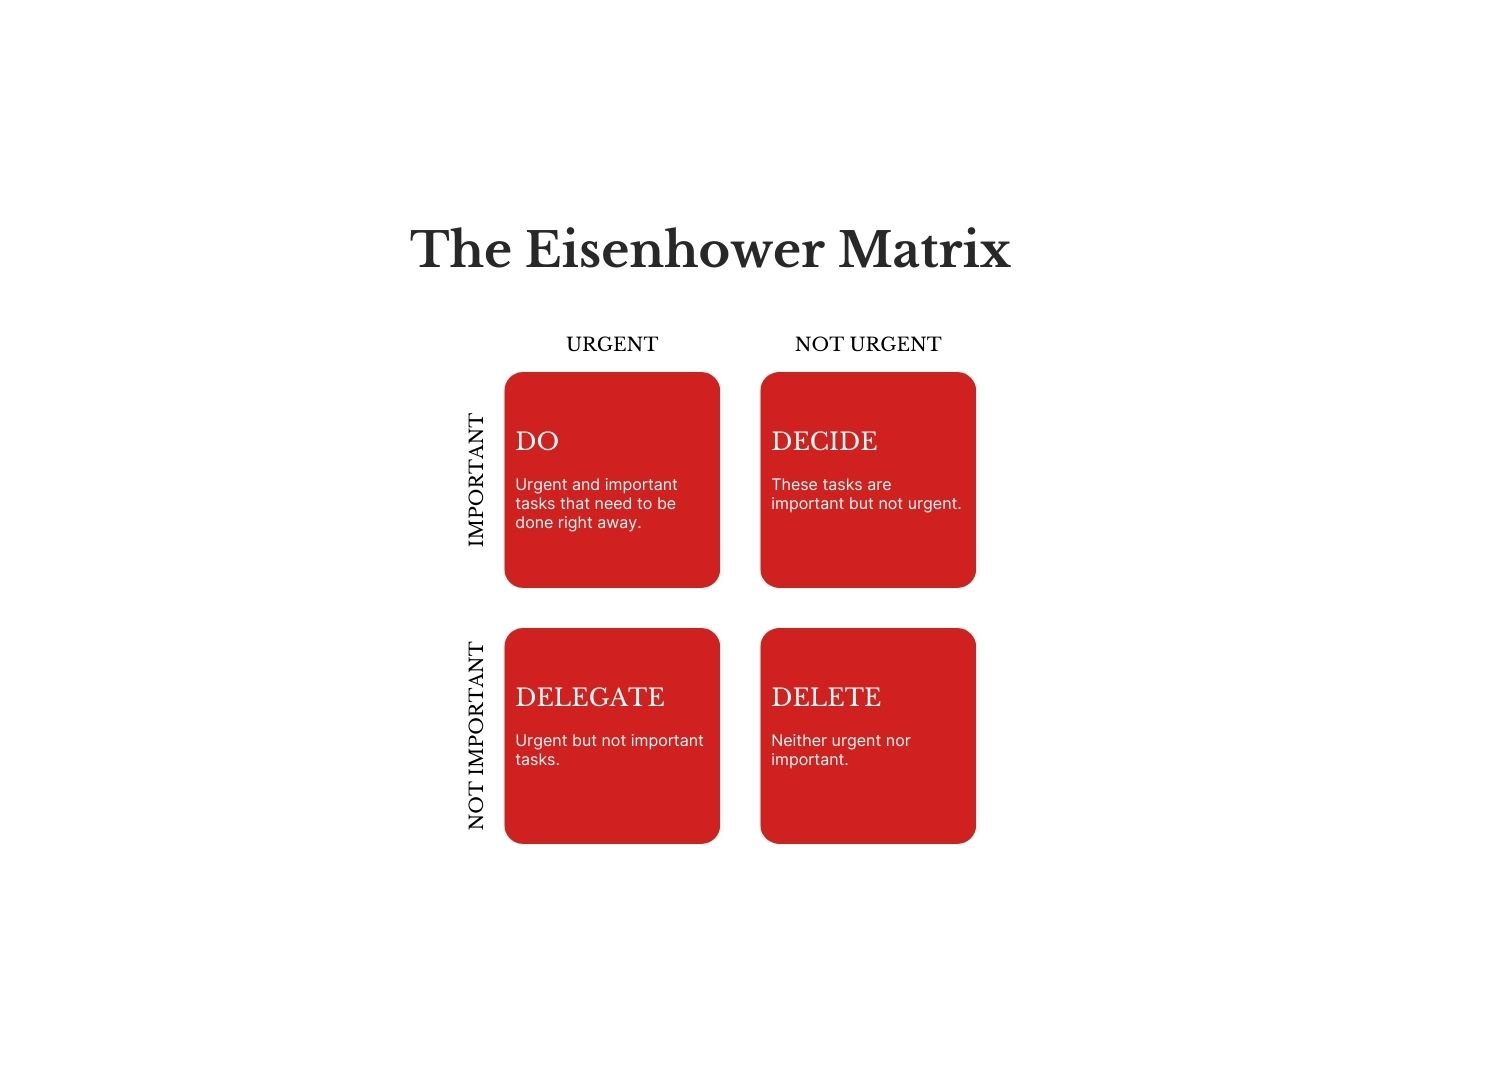 Infographic entitled The Eisenhower Matrix showing the actions to take depending on the urgency and importance of the tasks.